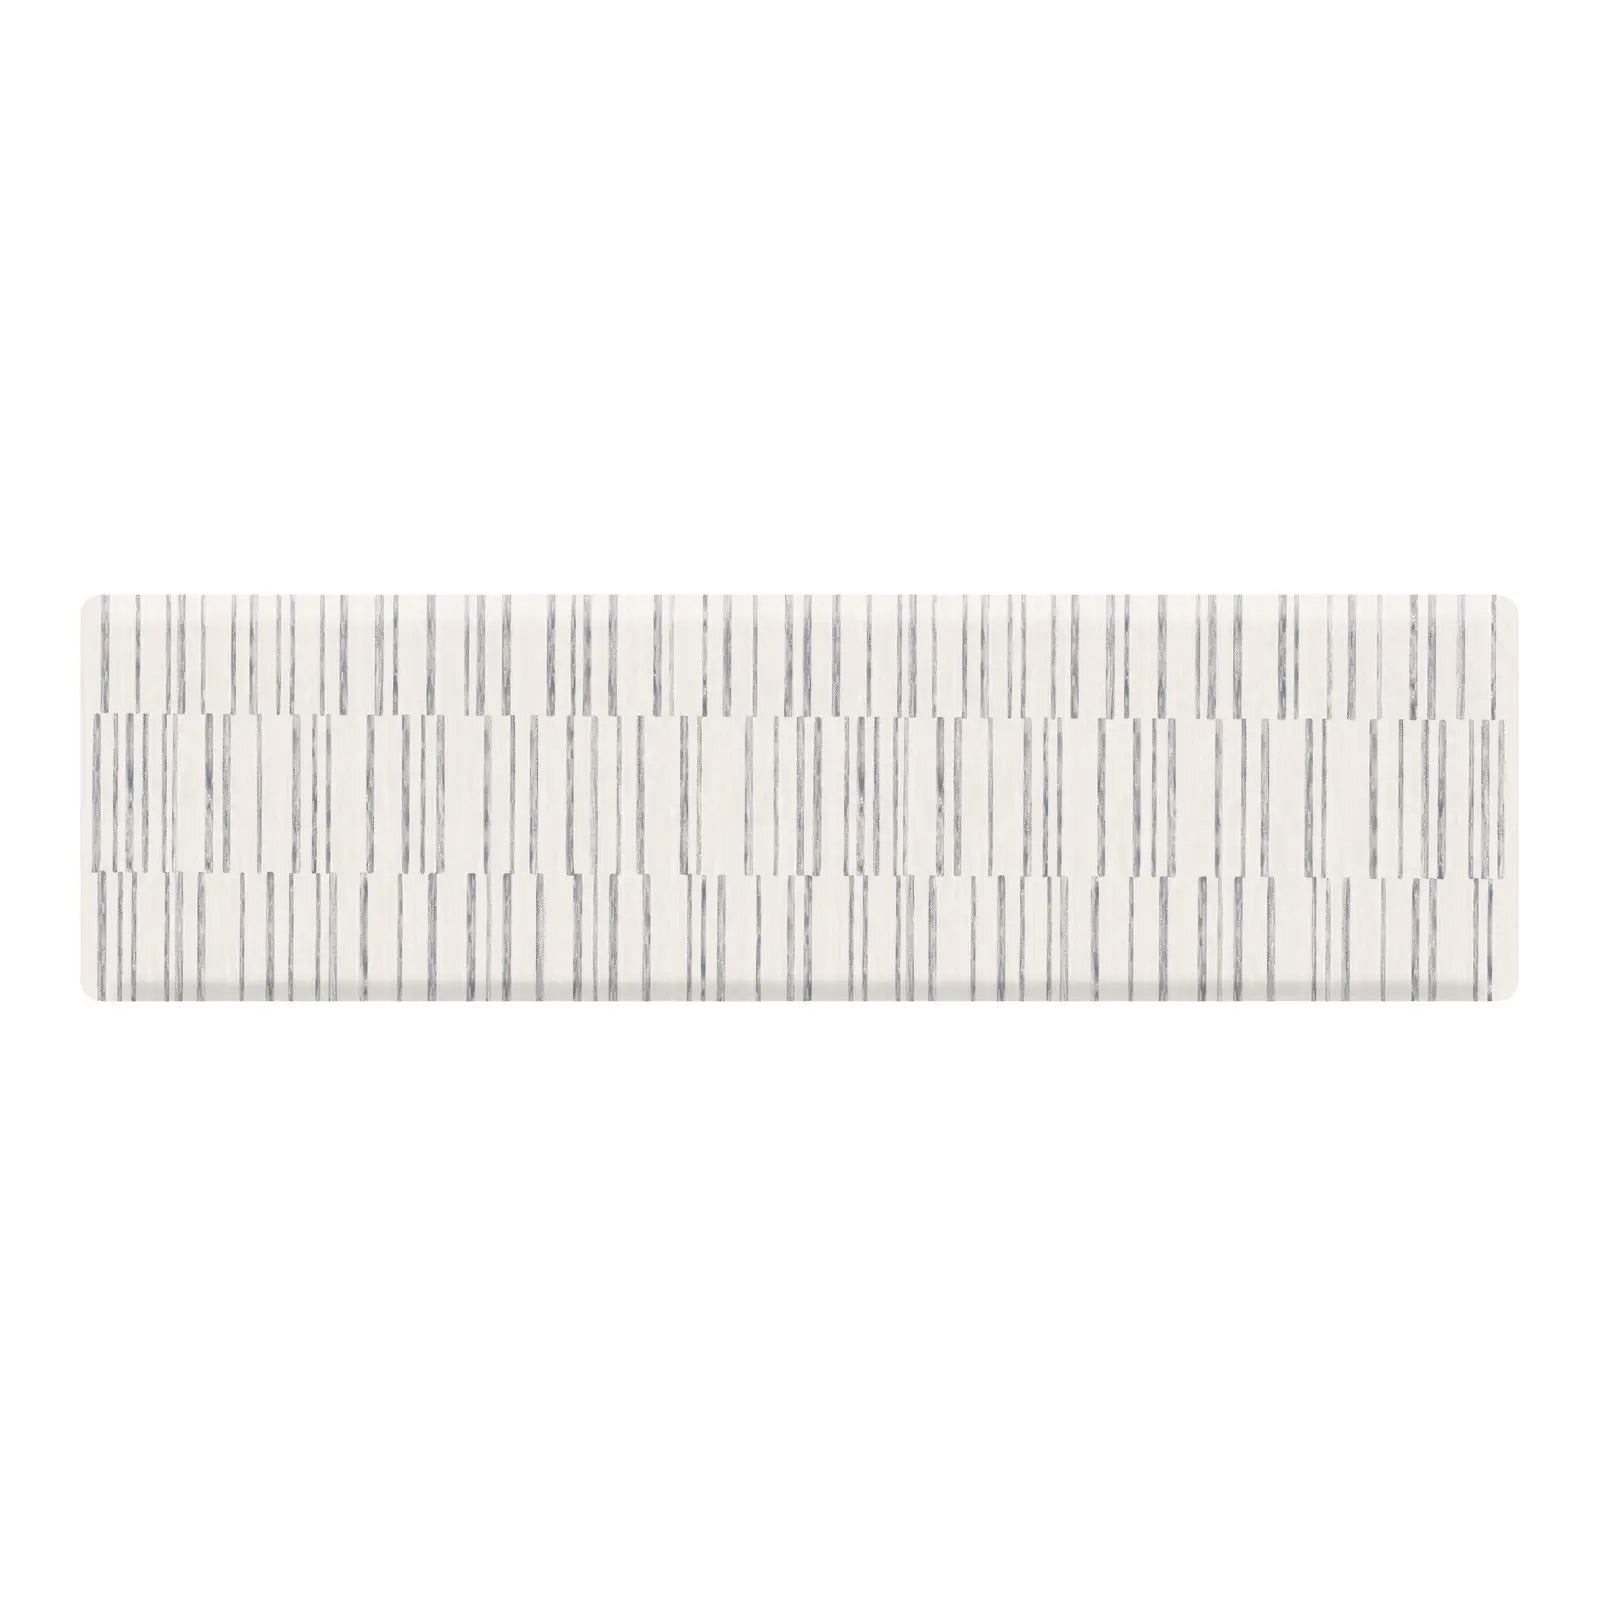 Gray and white inverted stripe kitchen mat shown in size 30x108